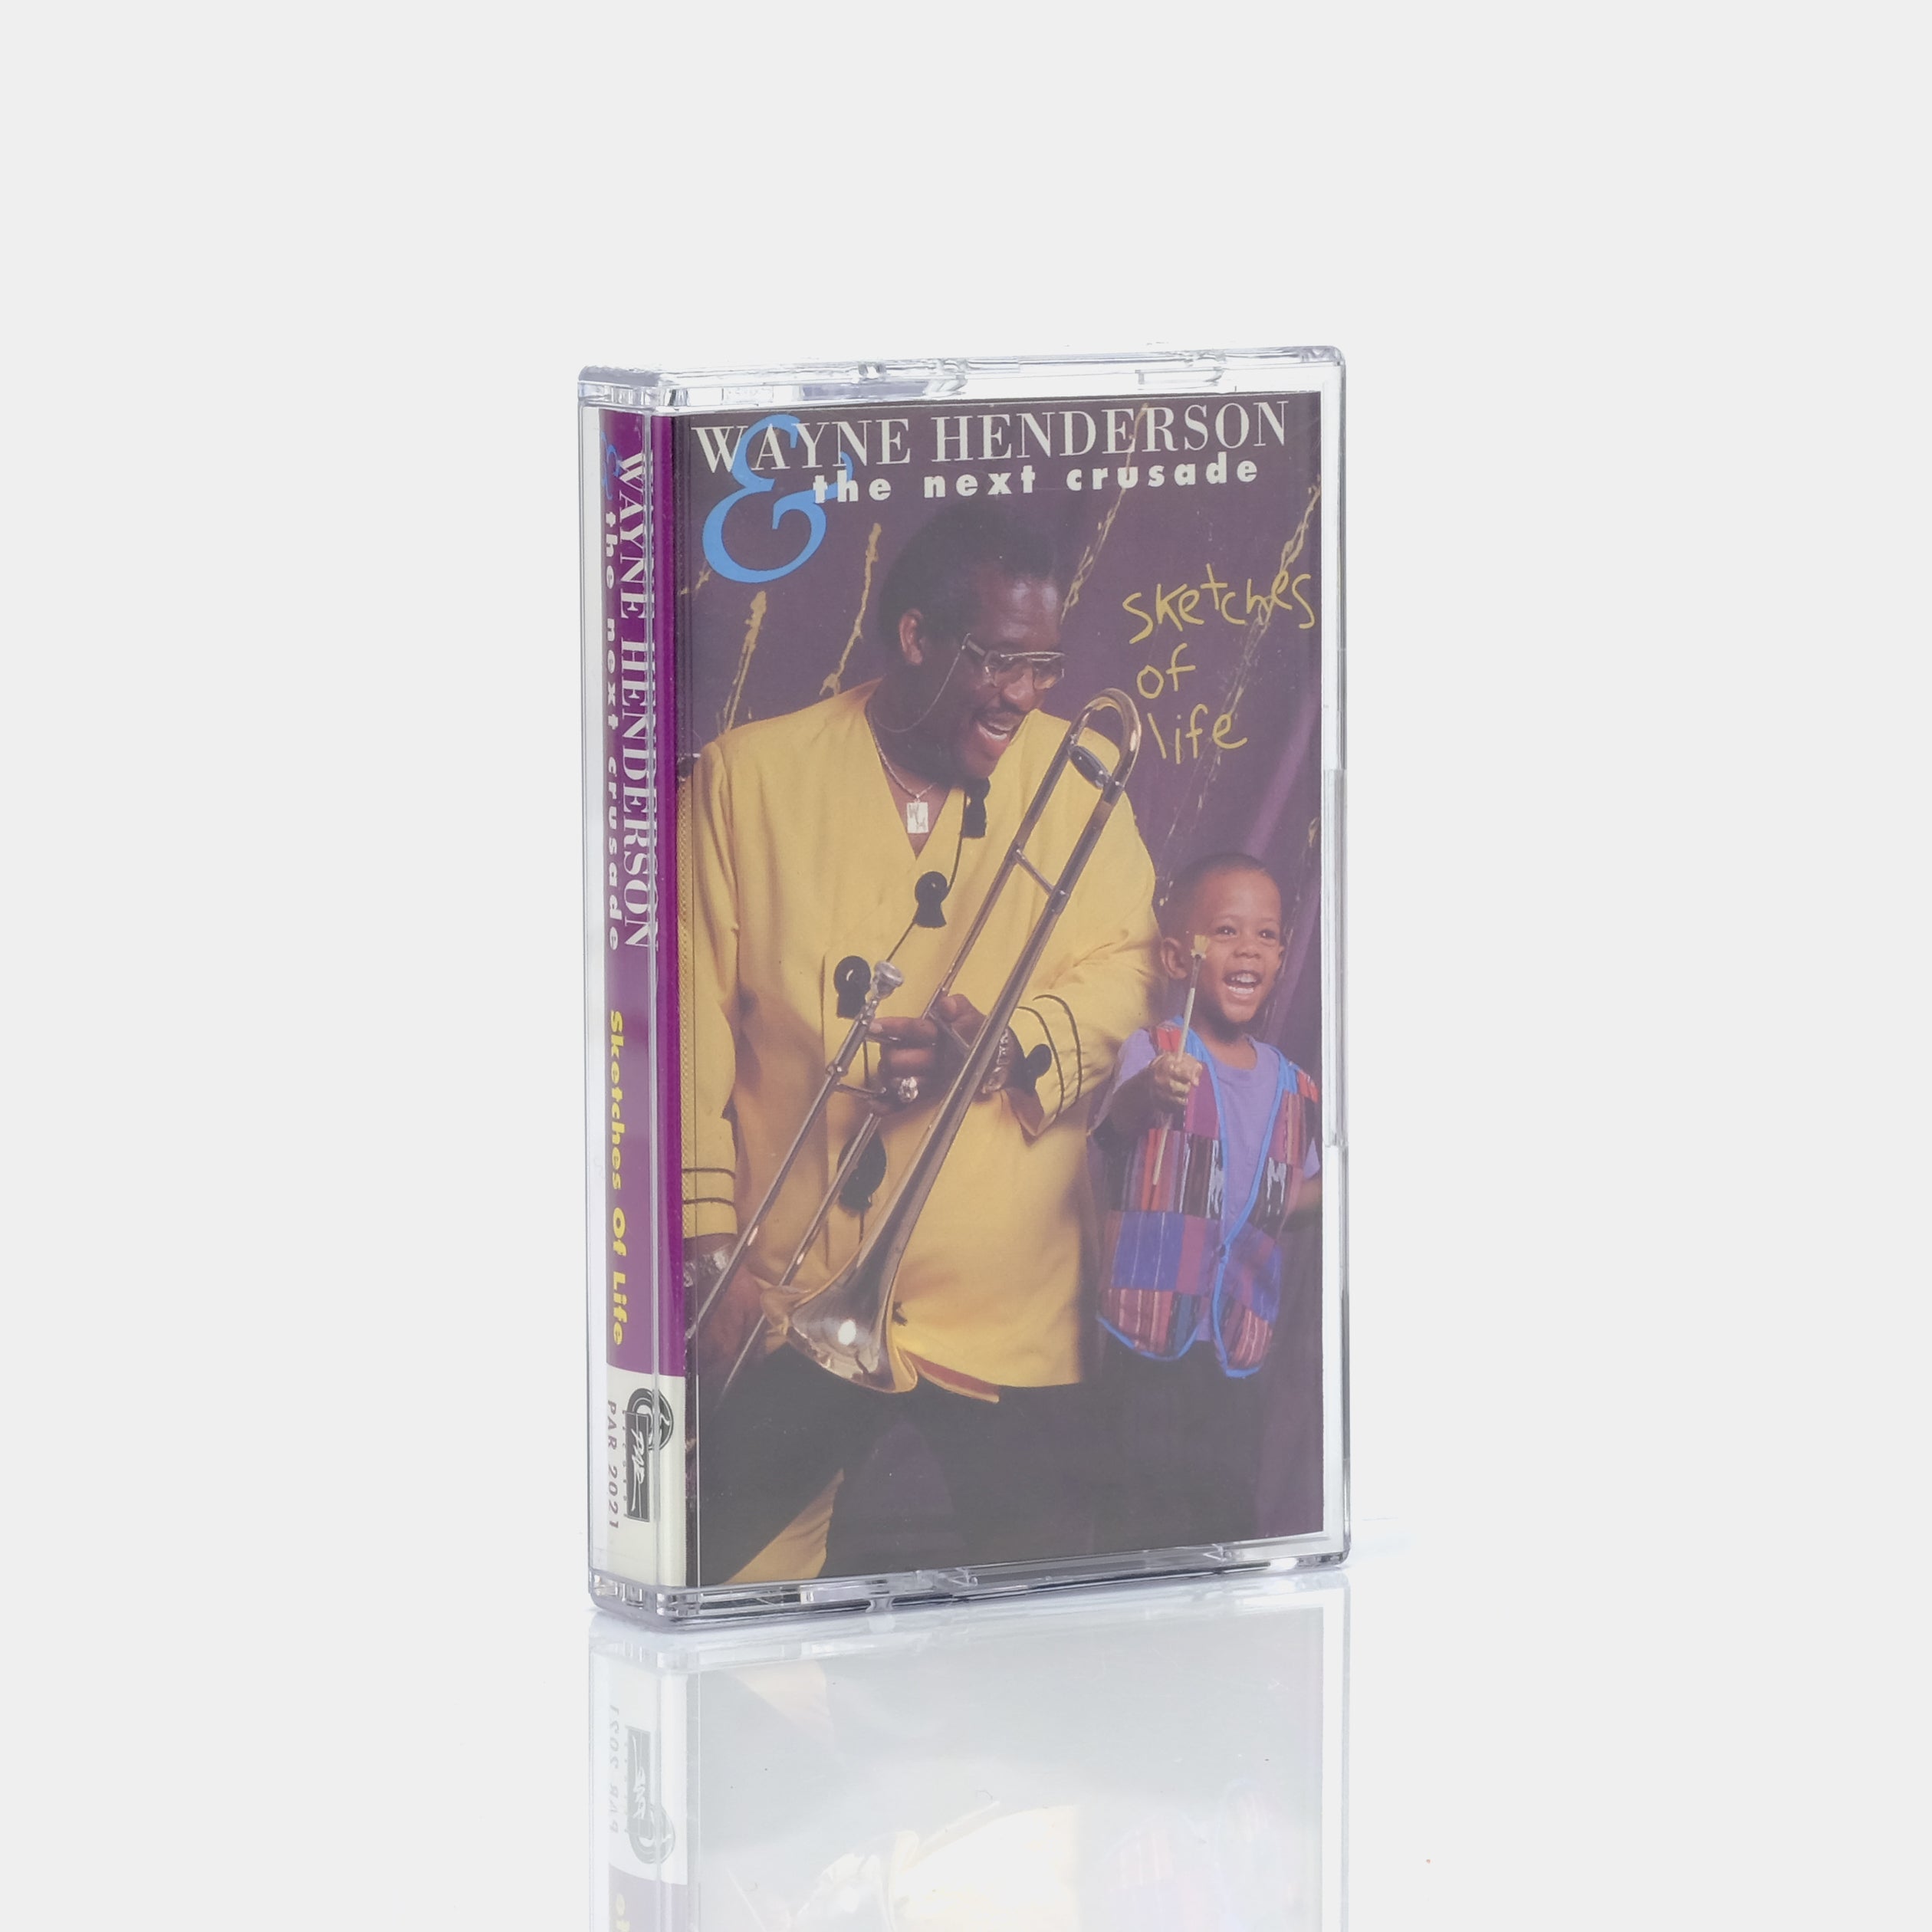 Wayne Henderson & The Next Crusade - Sketches Of Life Cassette Tape